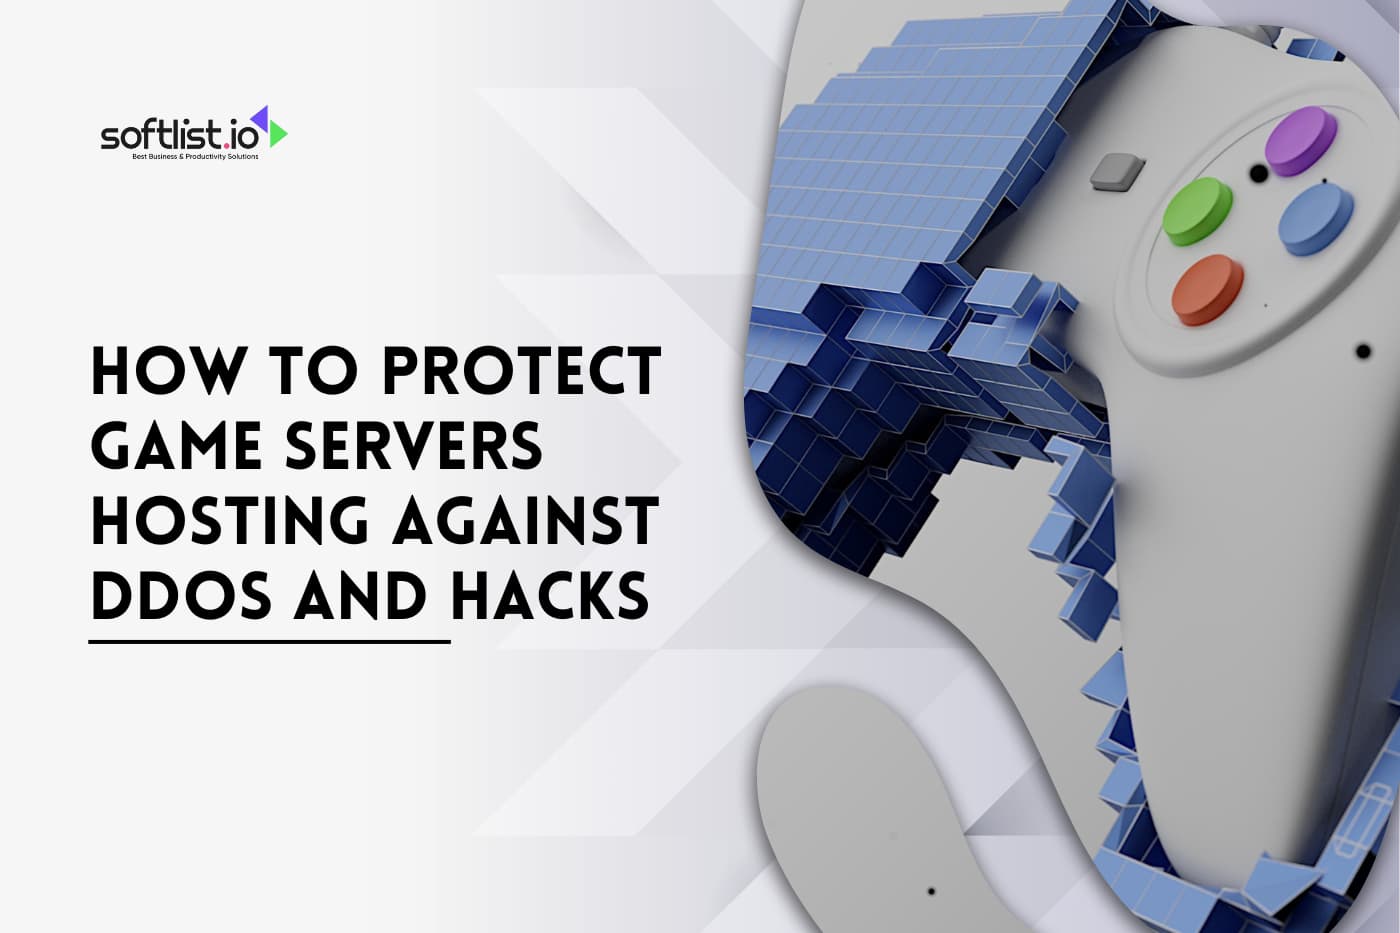 Security Checklist For Game Servers Protecting Against DDoS And Hacks